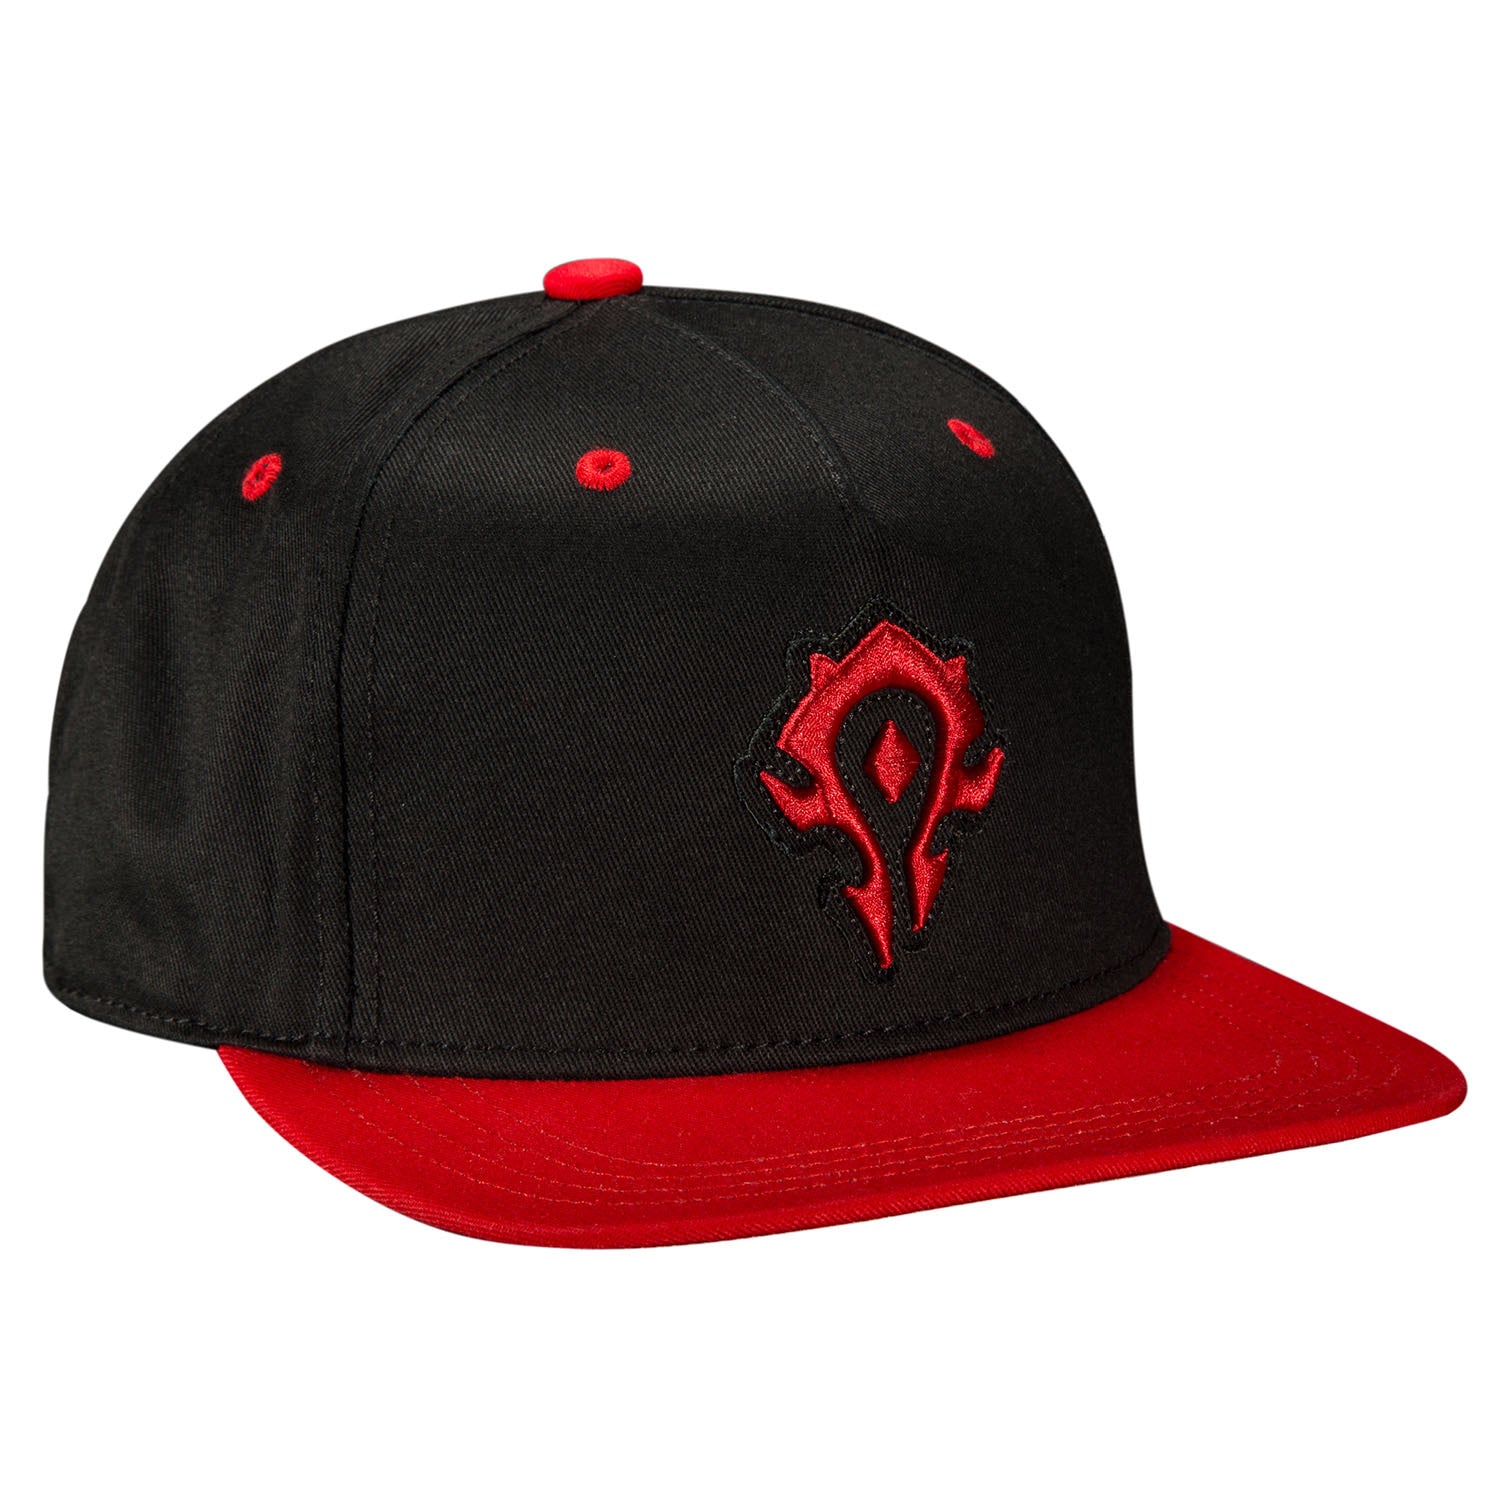 World of Warcraft Horde J!NX Black Flatbill Snapback Hat - Front Right View